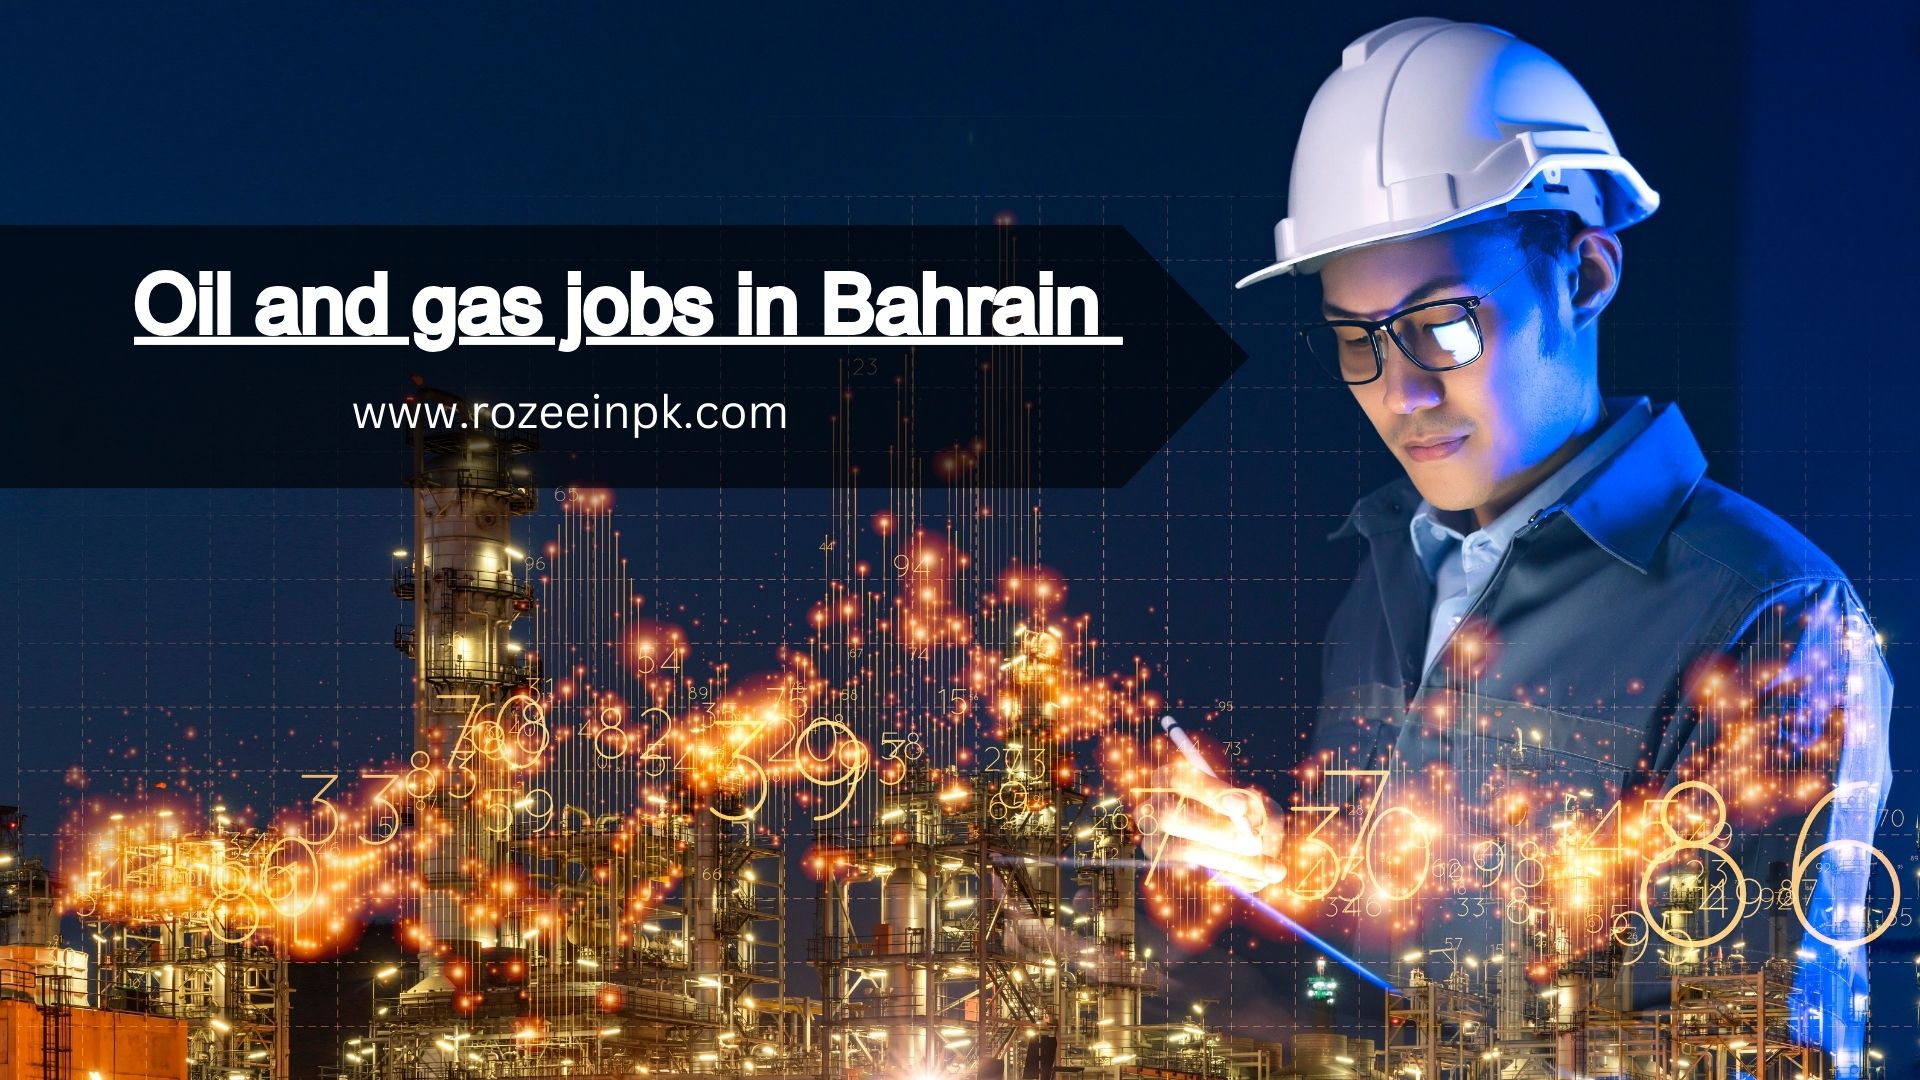 Oil and gas jobs in Bahrain 